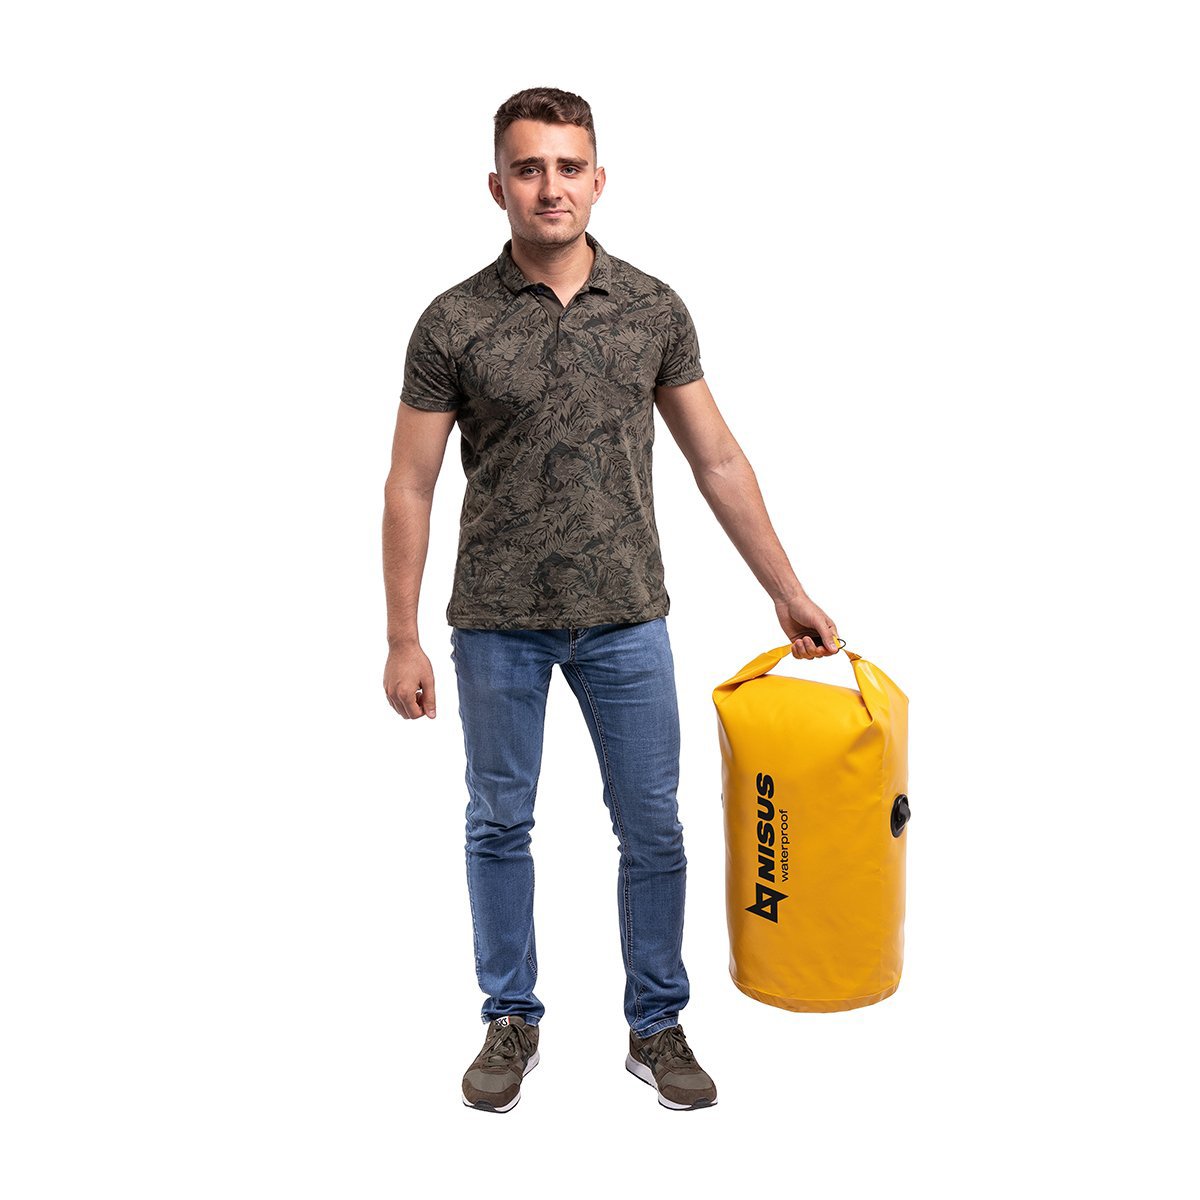 A man carrying a 50 L Waterproof Spacious Dry Bag, Yellow